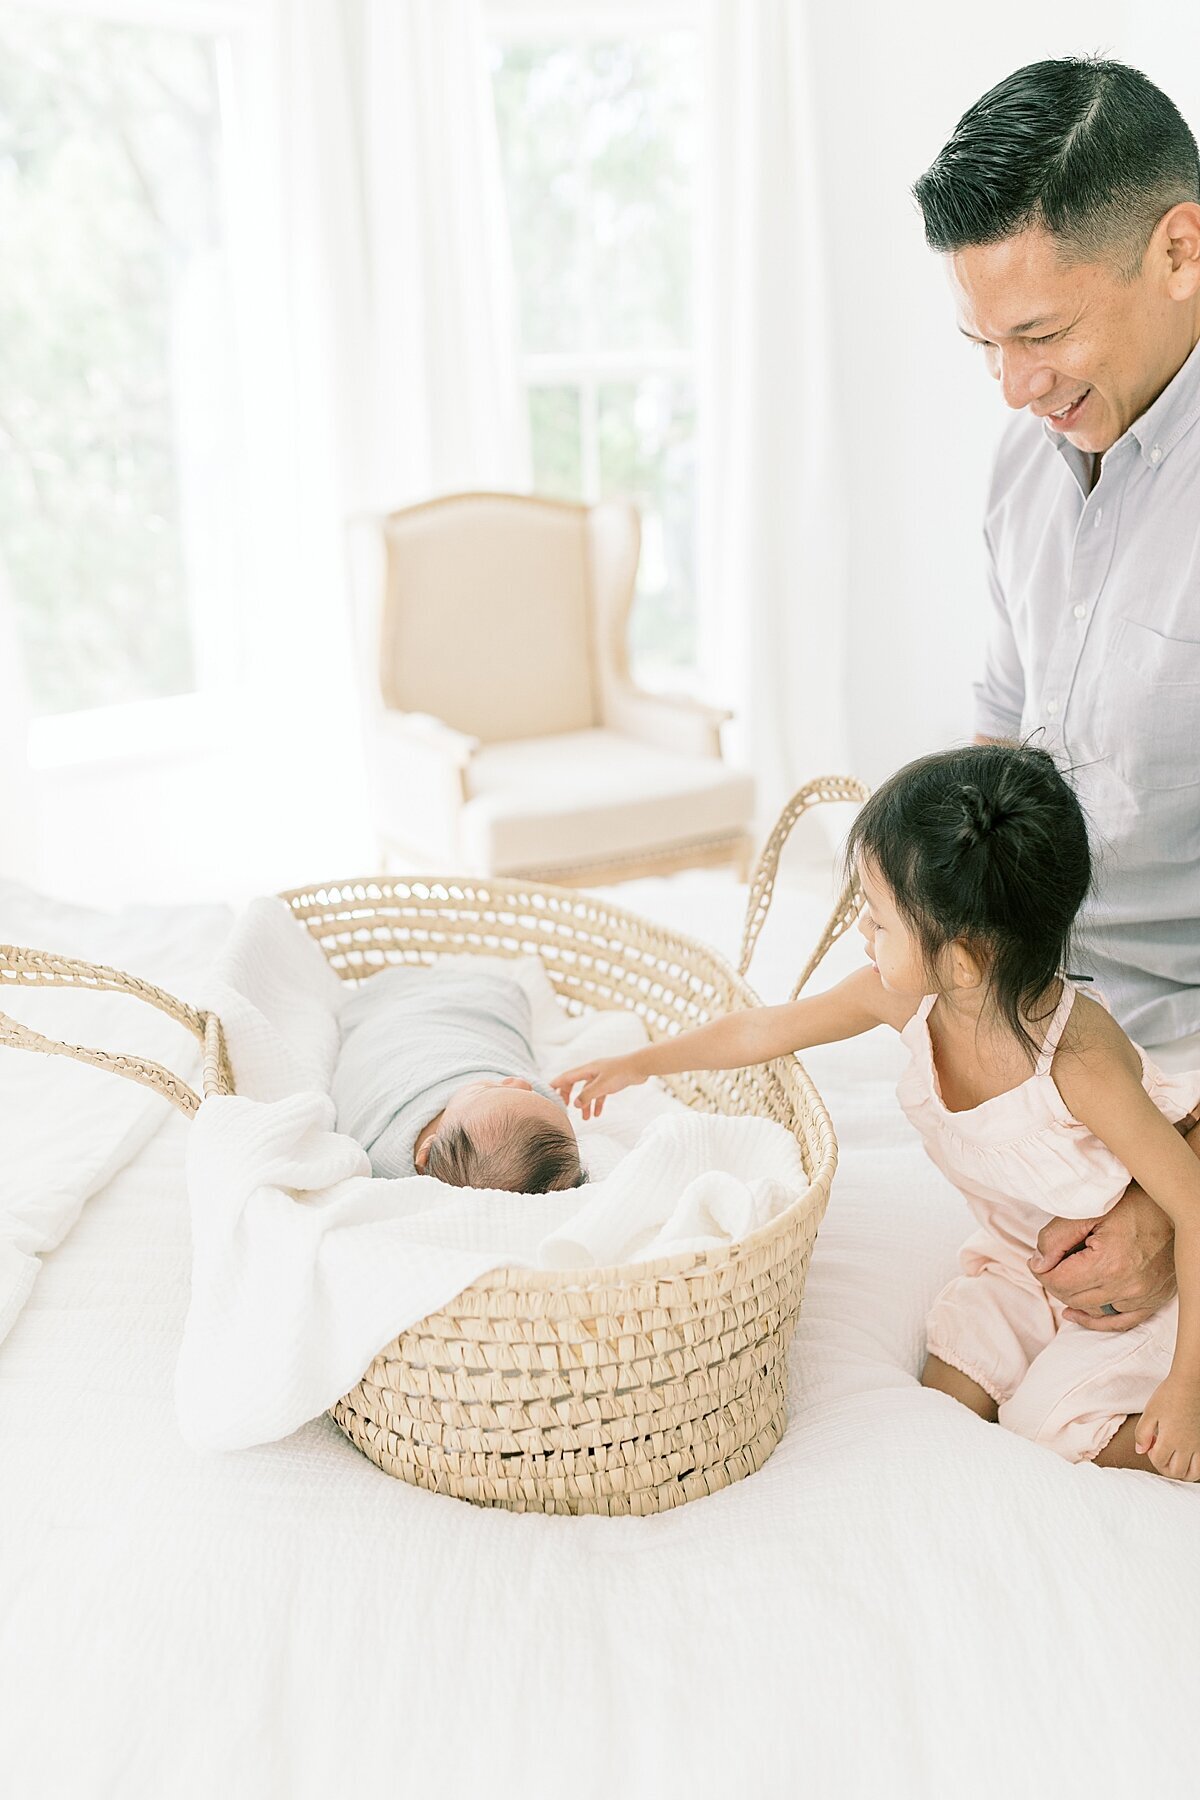 in-home-lifestyle-session-charleston-newborn-photographer-caitlyn-motycka-photography_0026